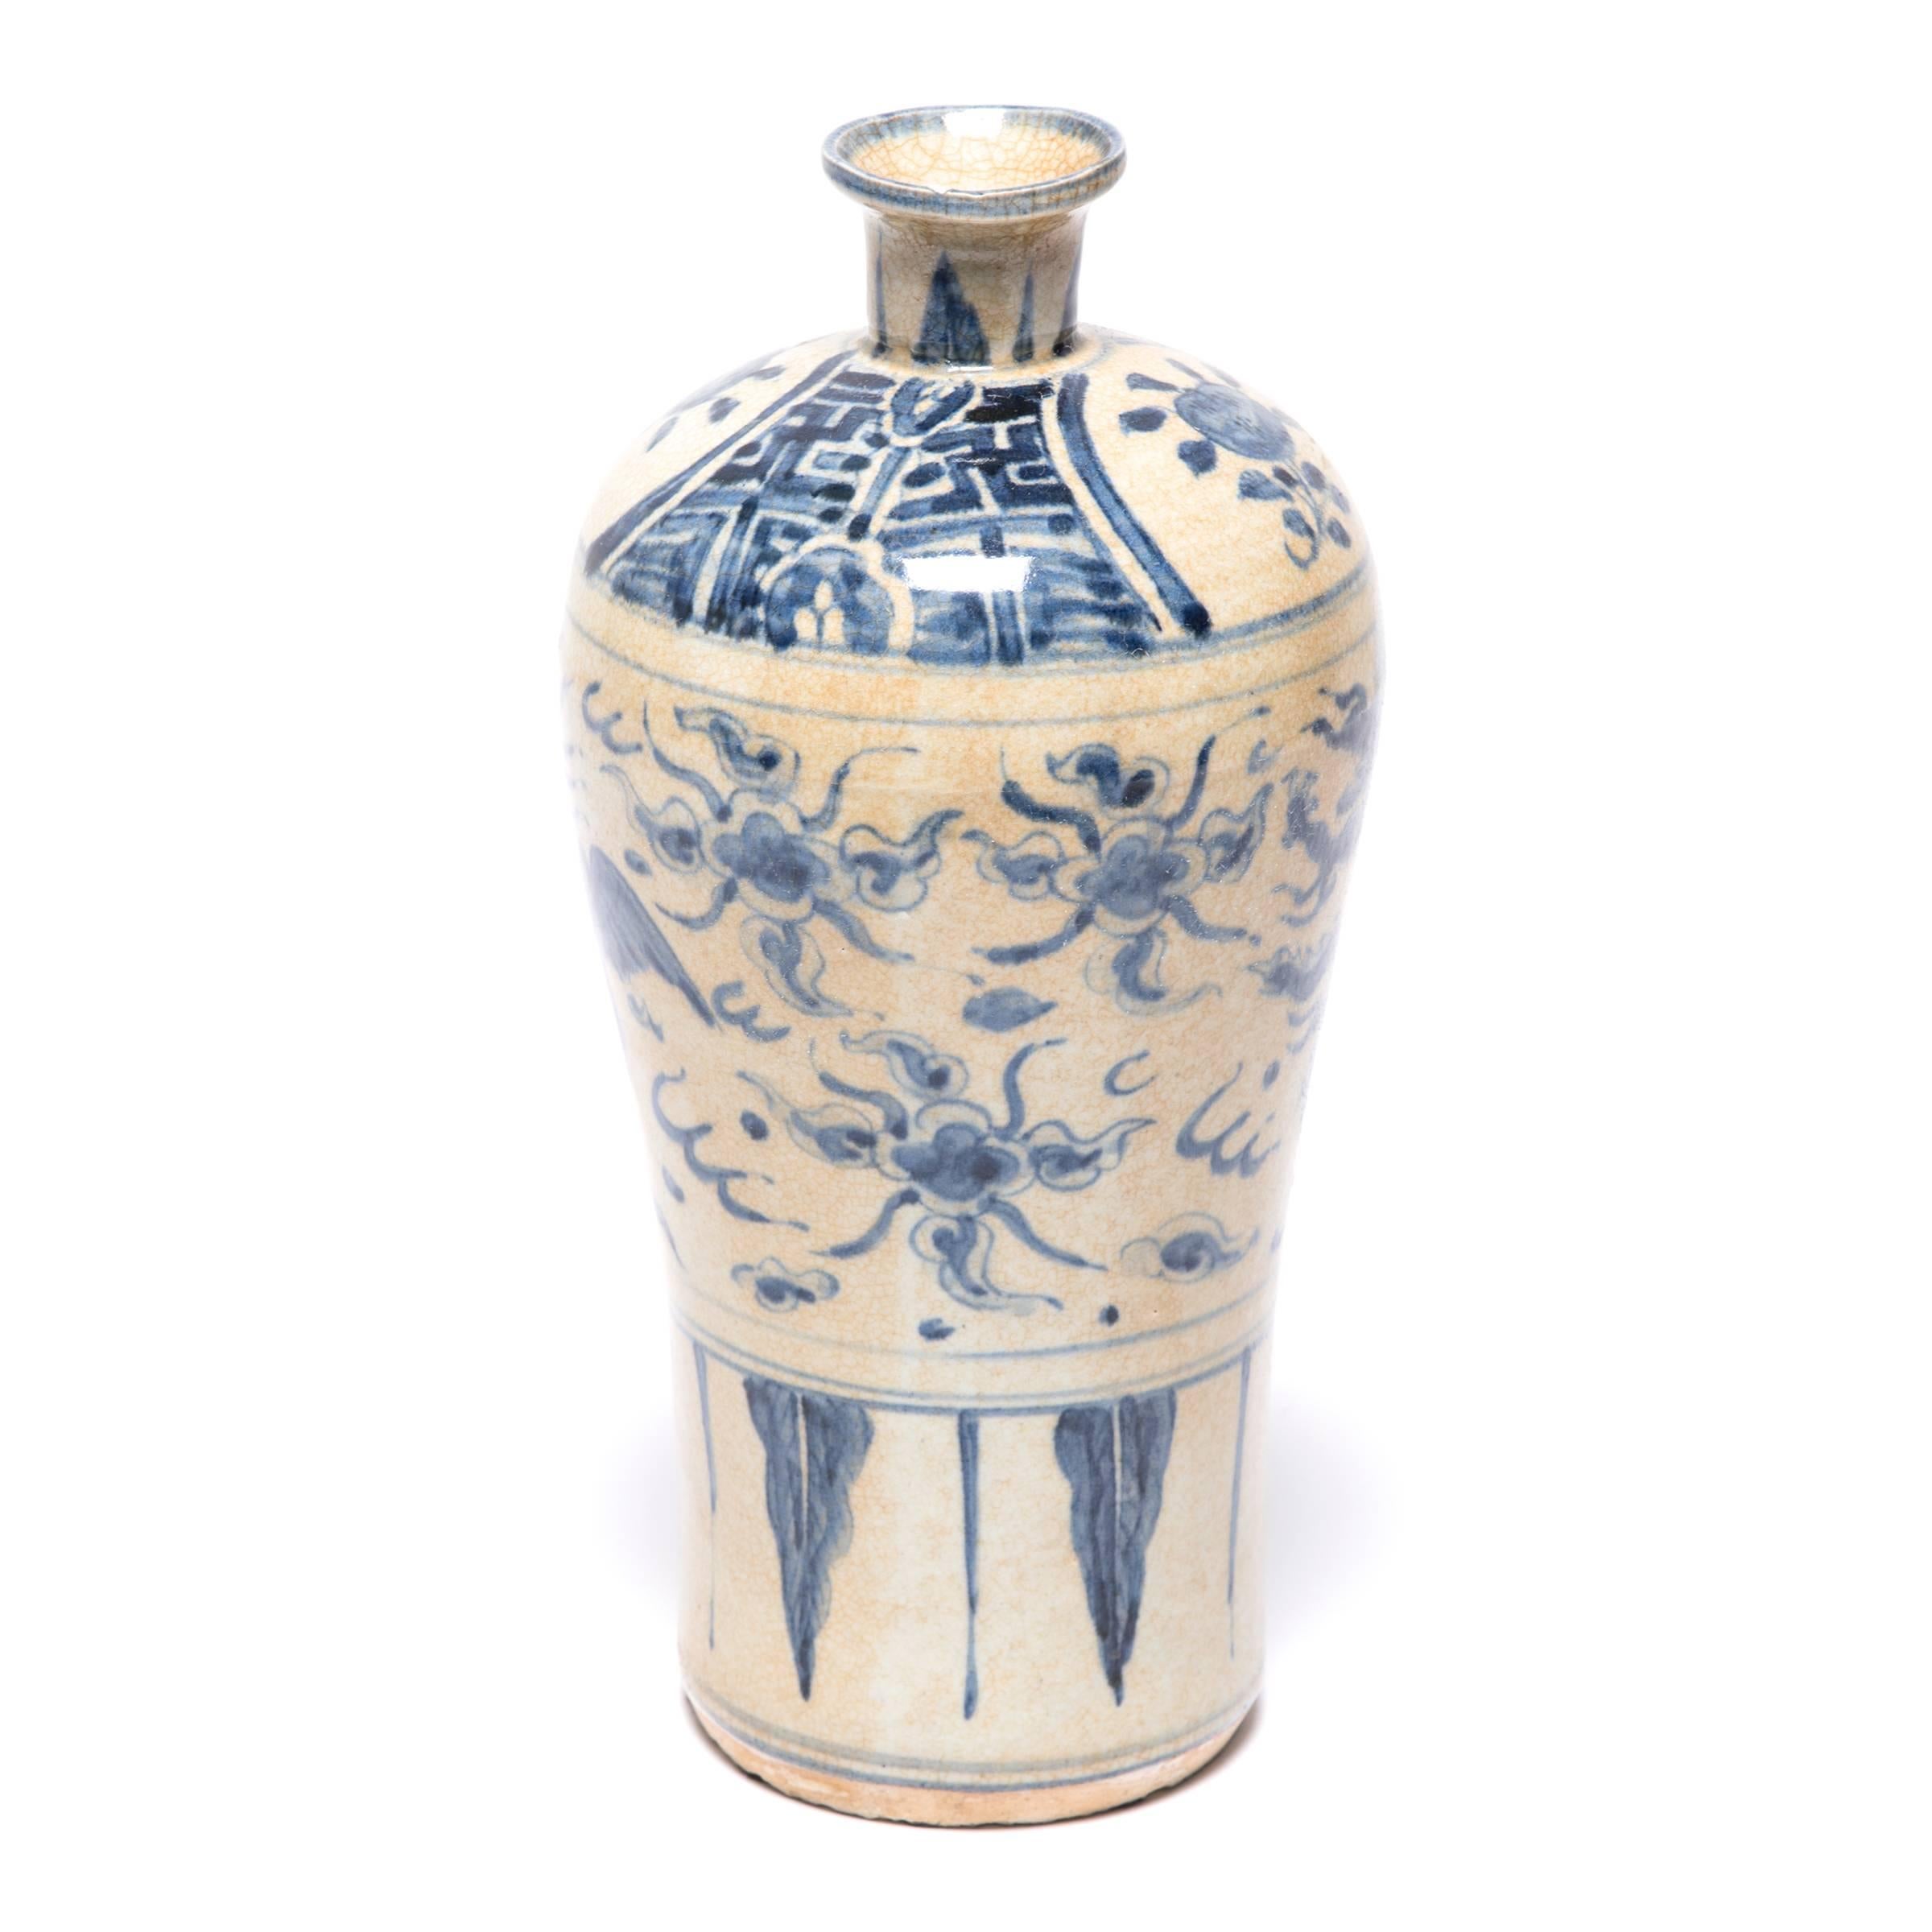 First developed during the Tang dynasty, blue-and-white porcelain has been treasured for centuries. Renowned for its painterly decoration and the beautiful contrast of rich blue on white, this unique ceramic style begins with a design painted on